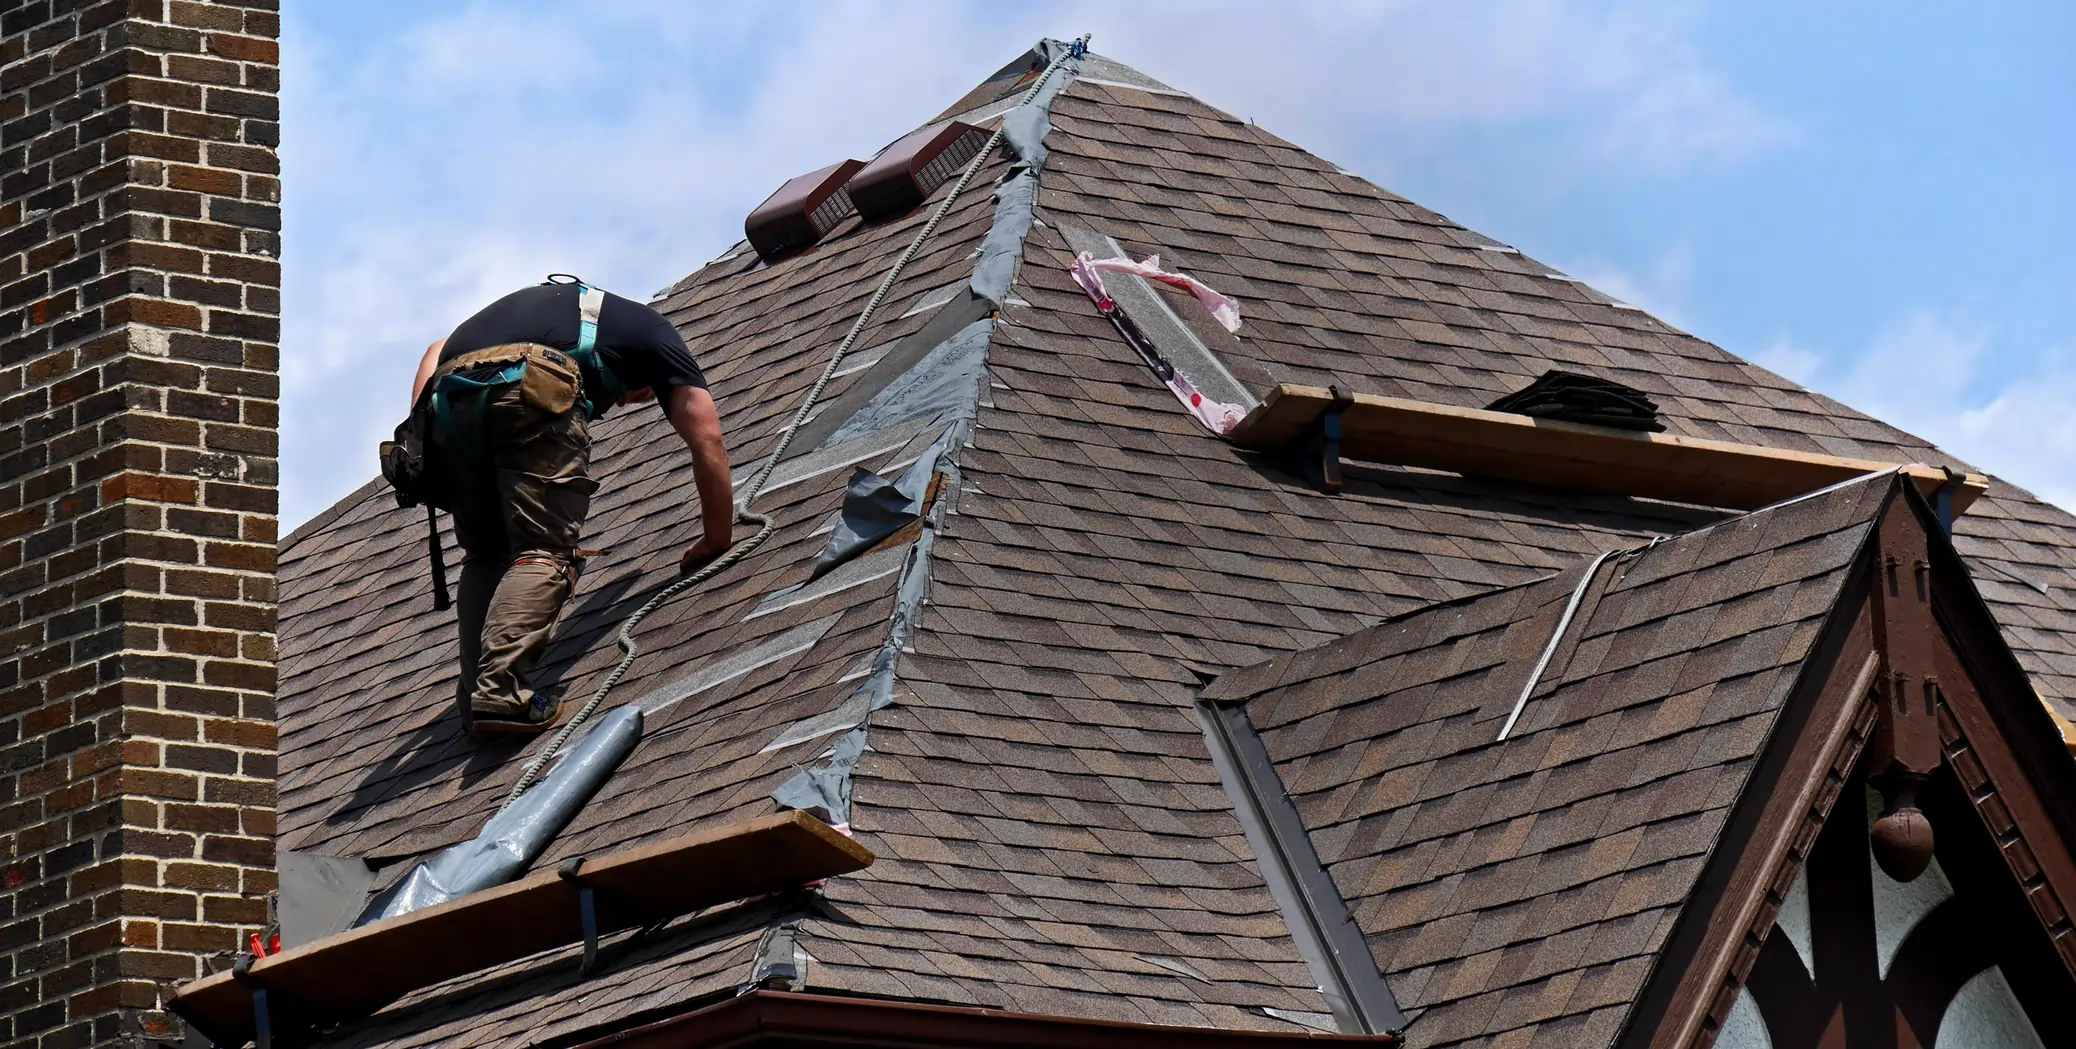 Local roofers working on a shingle roof